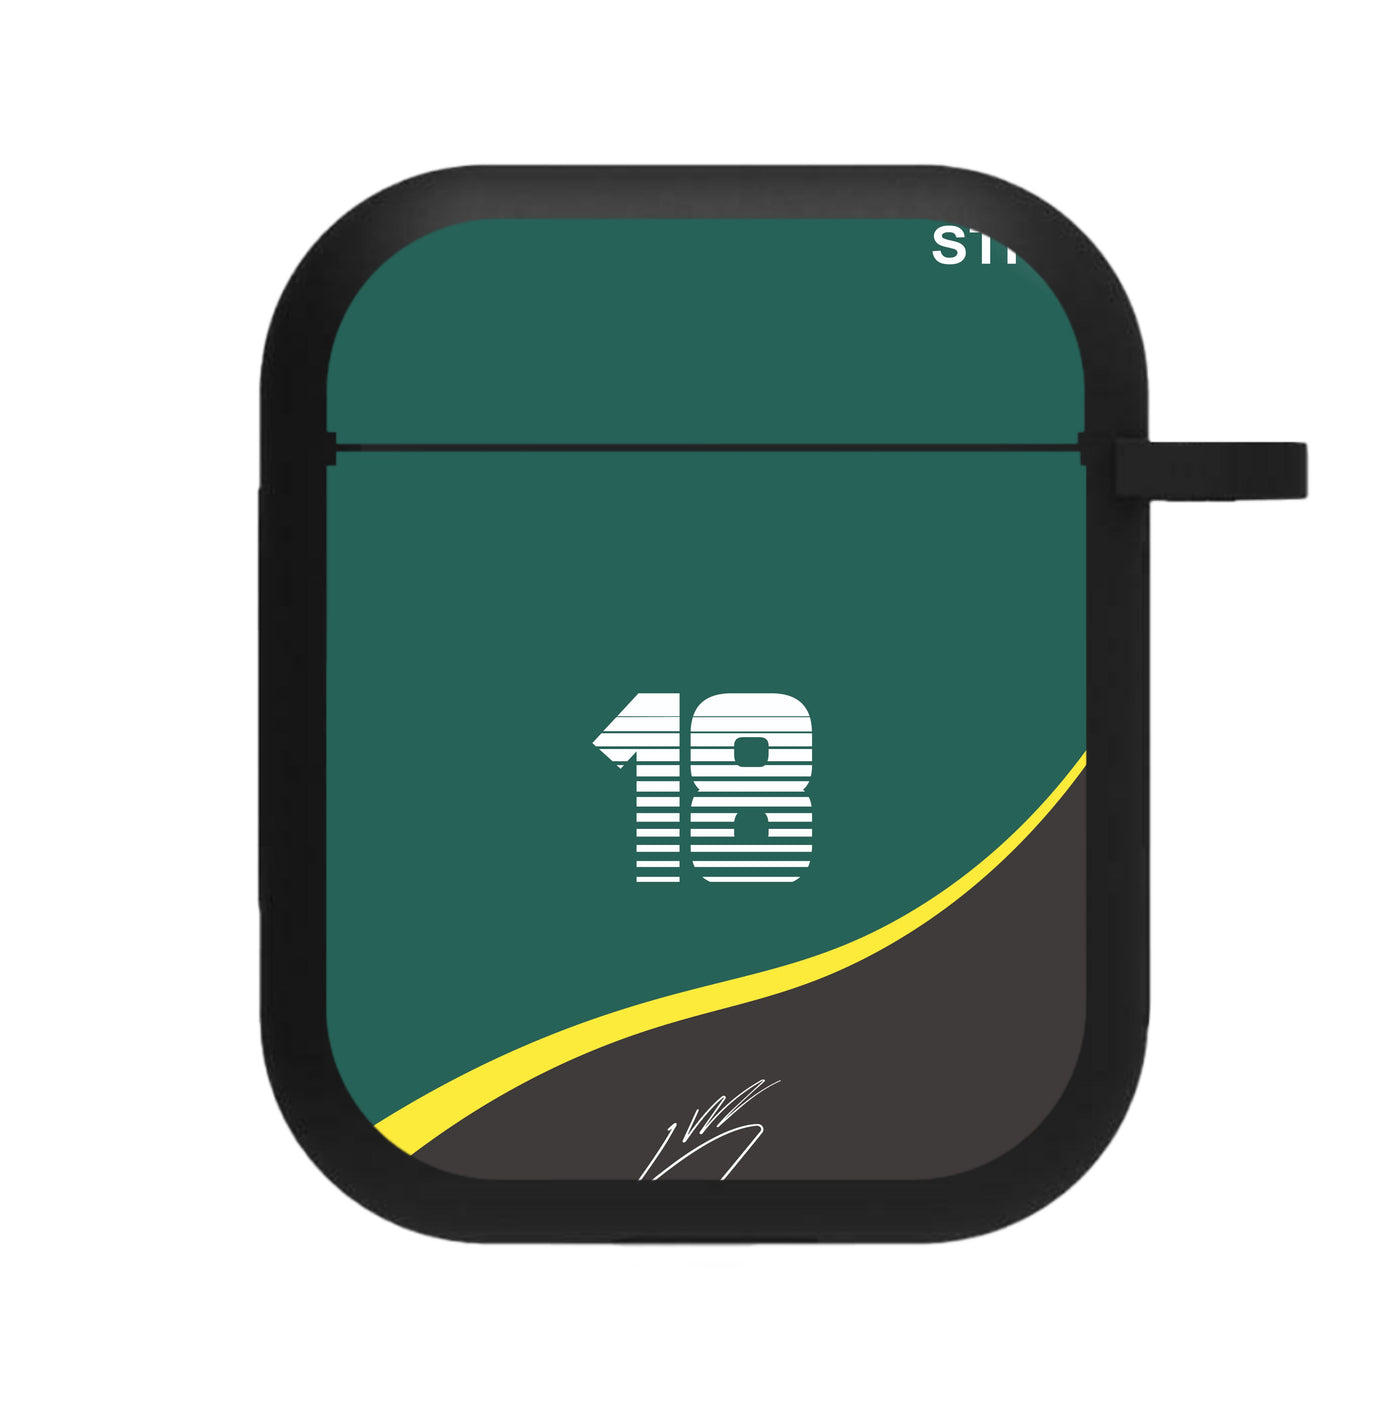 Lance Stroll - F1 AirPods Case